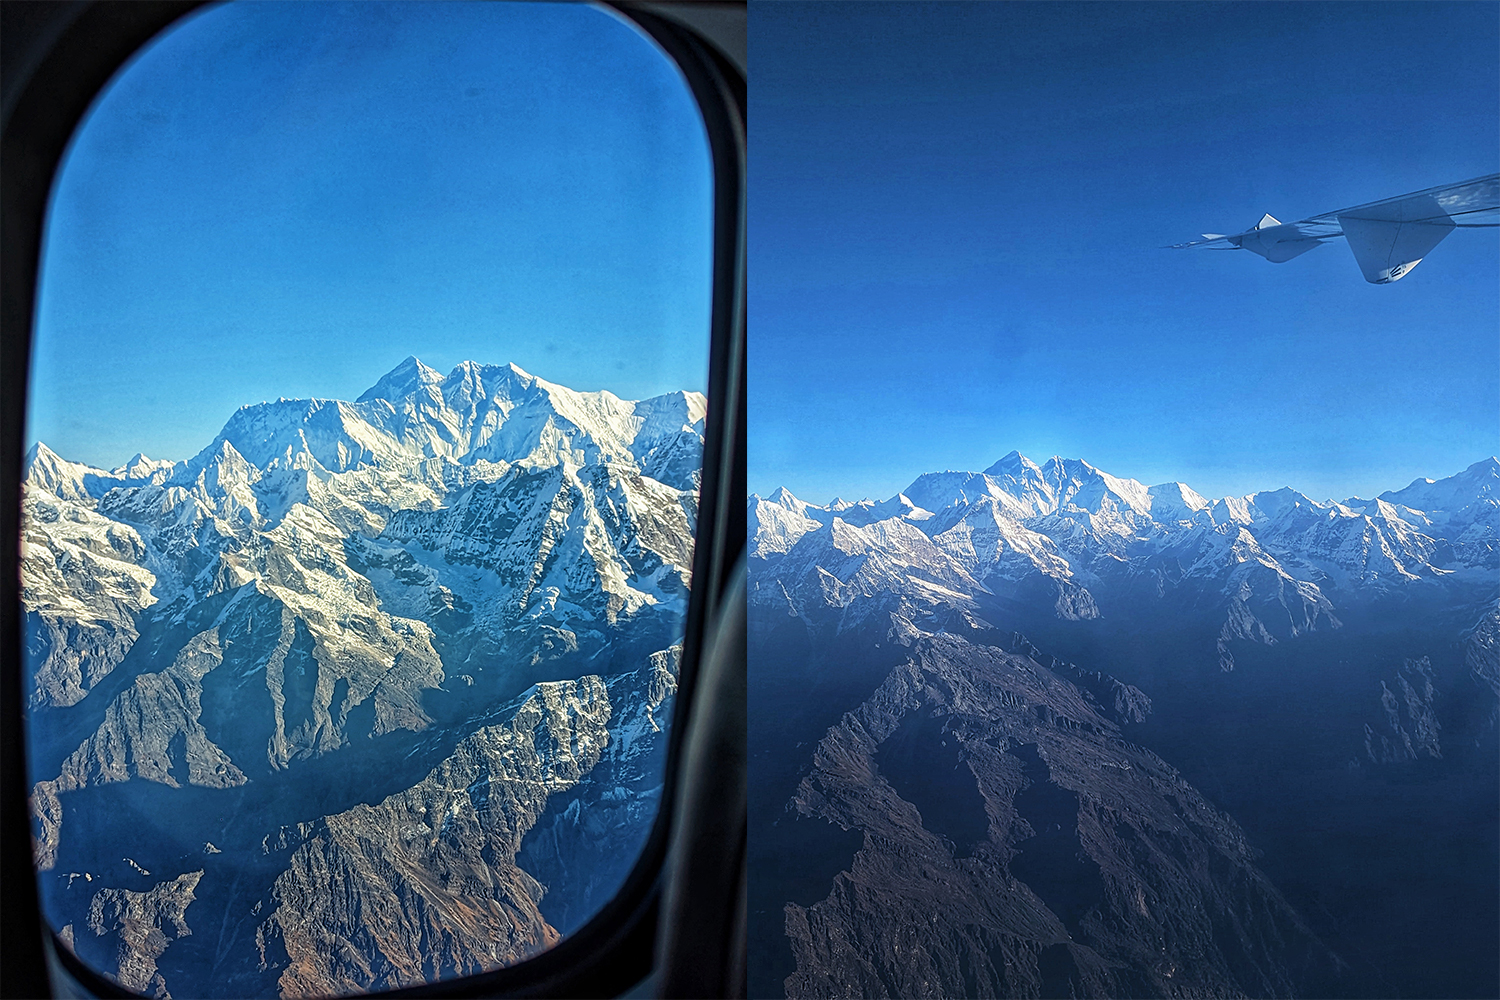 A view from the airplane window of Mount Everest during a flight from Yeti Airlines